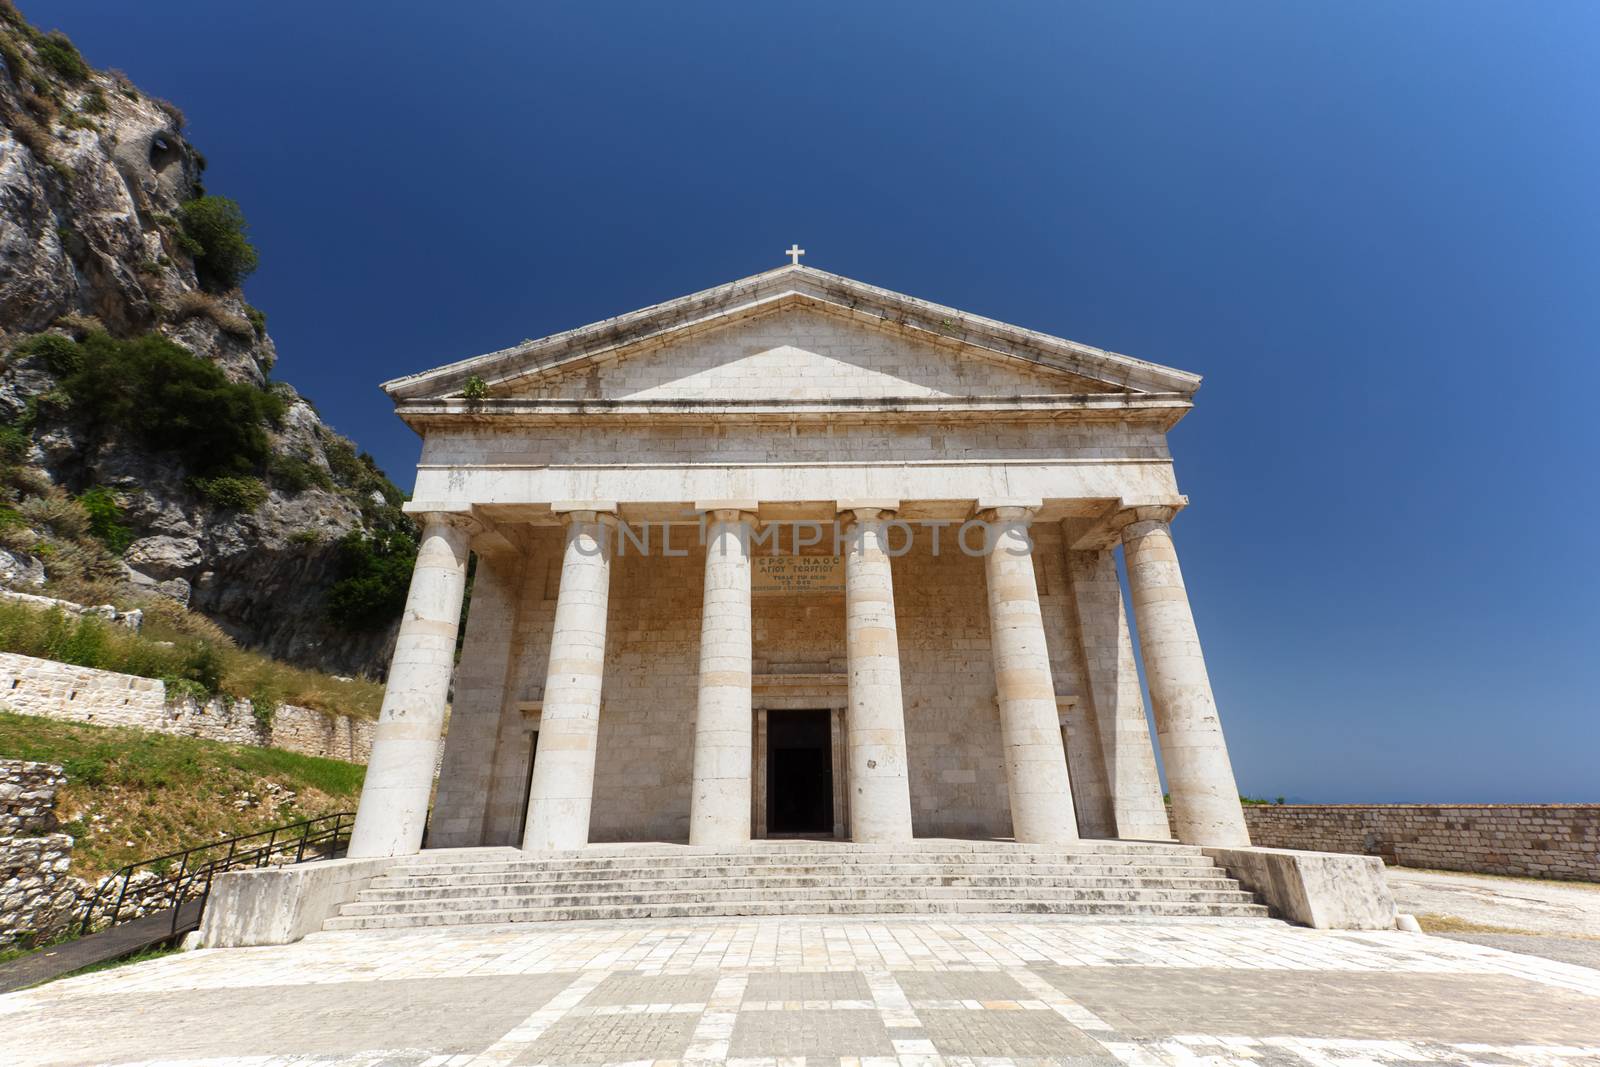 Ancient Hellenic temple in Kerkira, Corfu, Greece. Today it is St. George church. Public domain